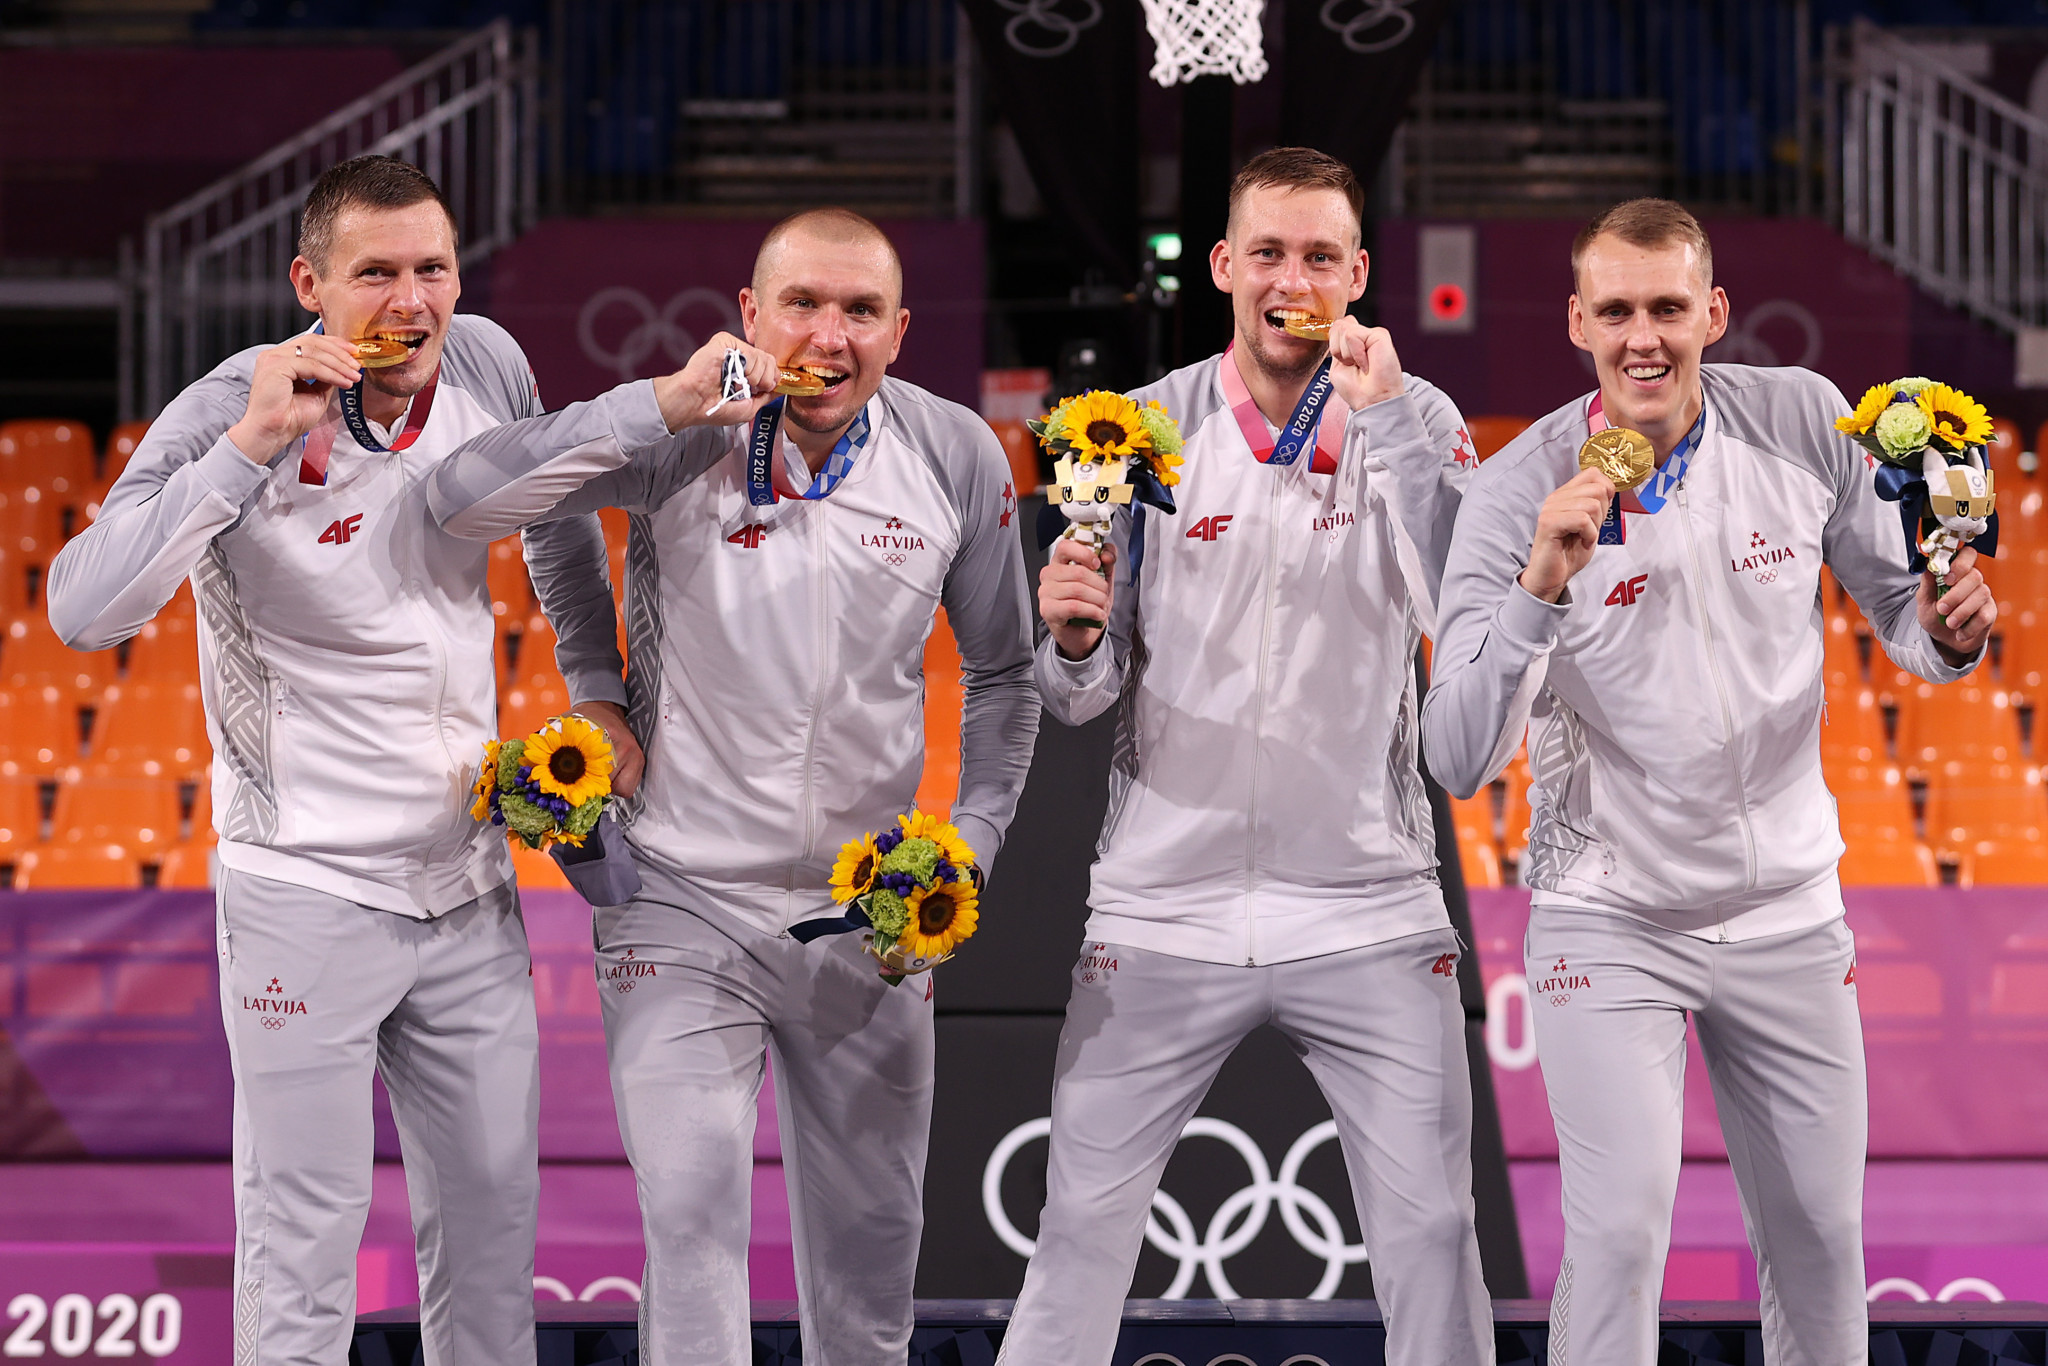 Latvia's gold-medal winning quartet from the 3x3 basketball at Tokyo 2020 competed together for Riga at the 3x3 World Tour Abu Dhabi Masters ©Getty Images 